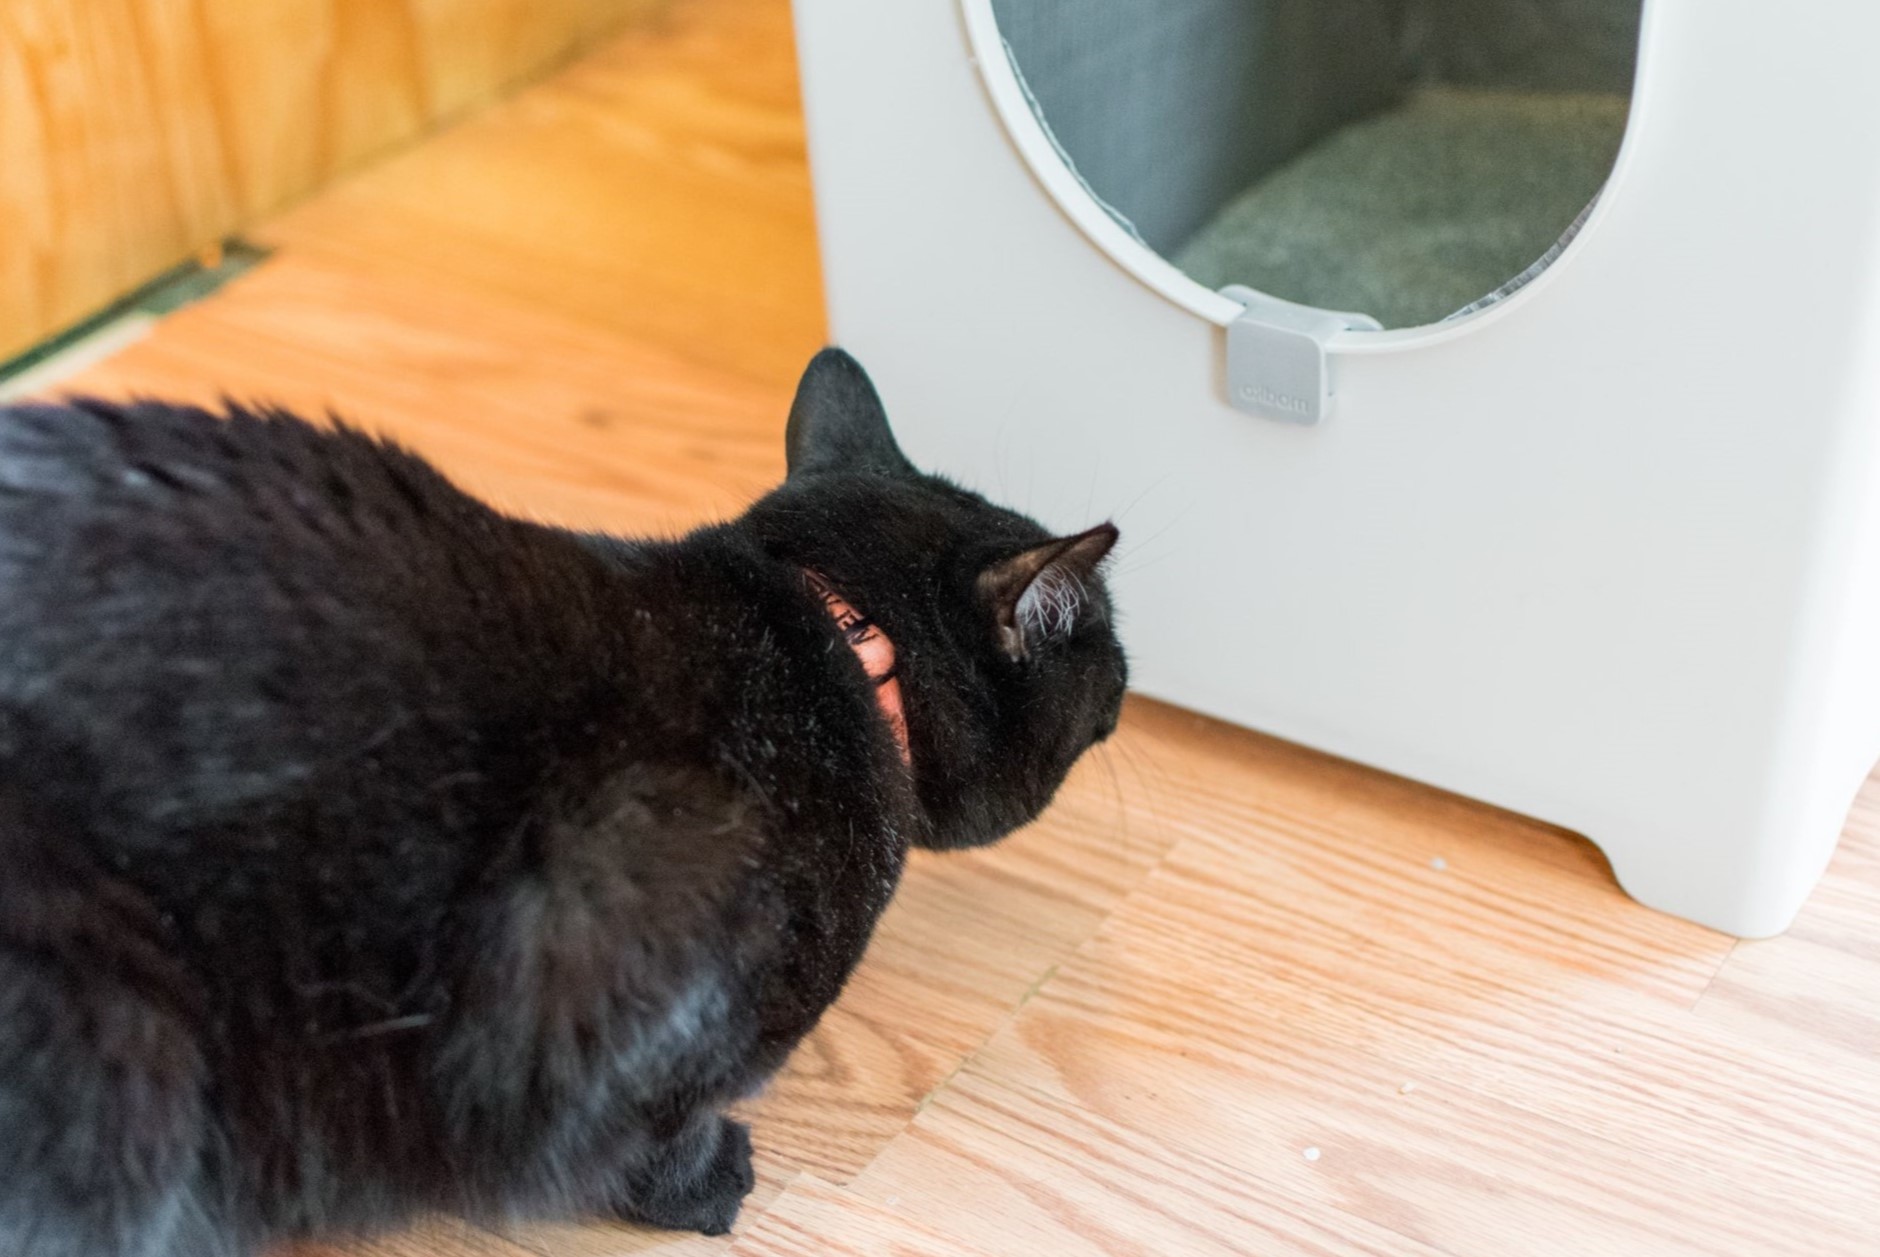 How To Get My Cat To Use A Litter Box